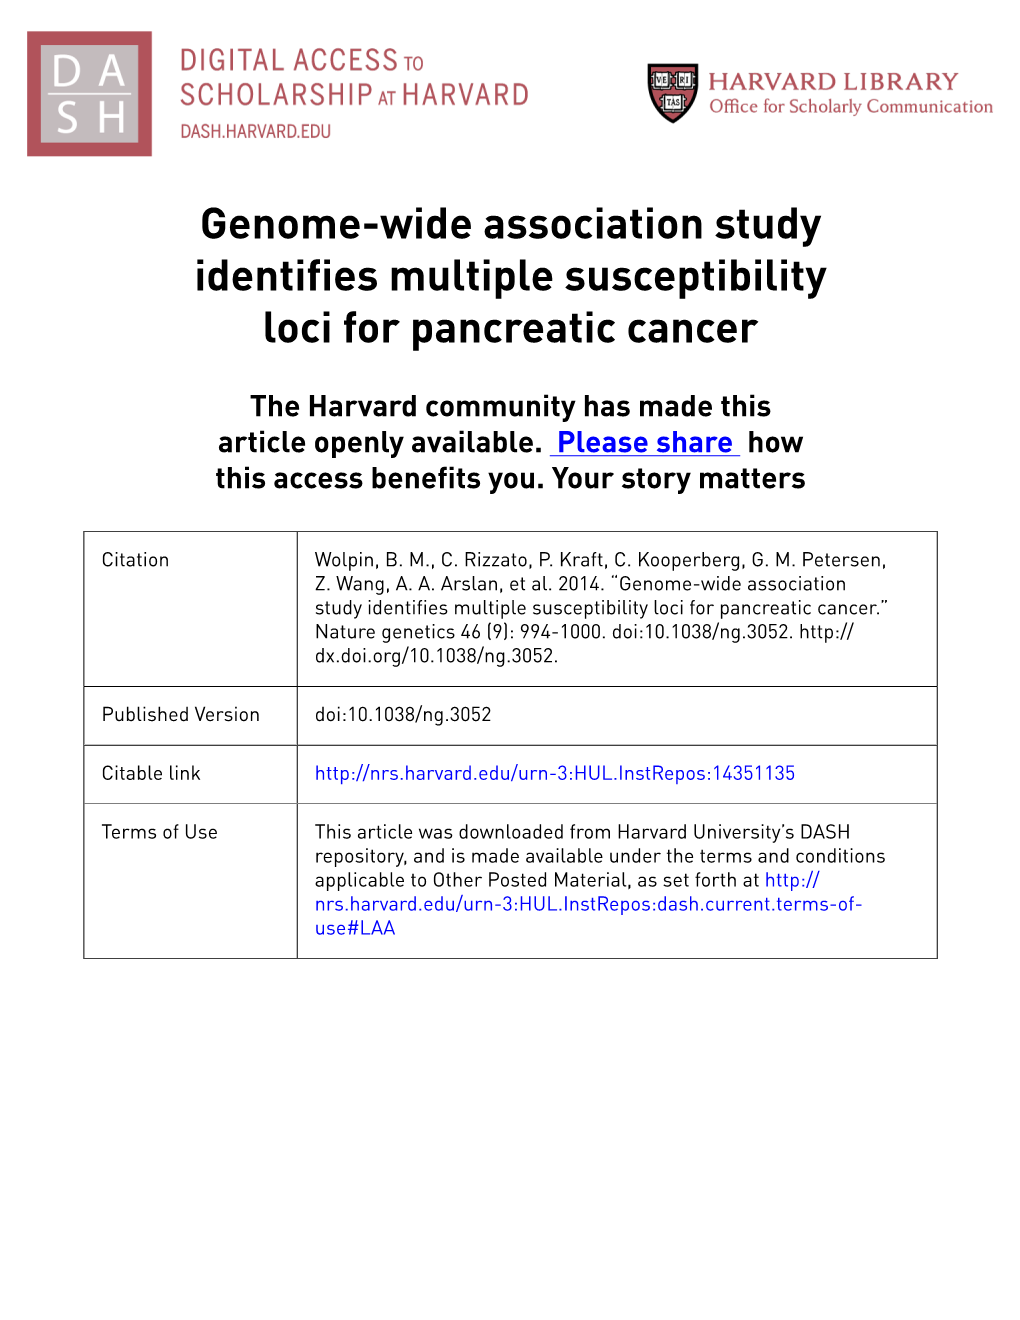 Genome-Wide Association Study Identifies Multiple Susceptibility Loci for Pancreatic Cancer